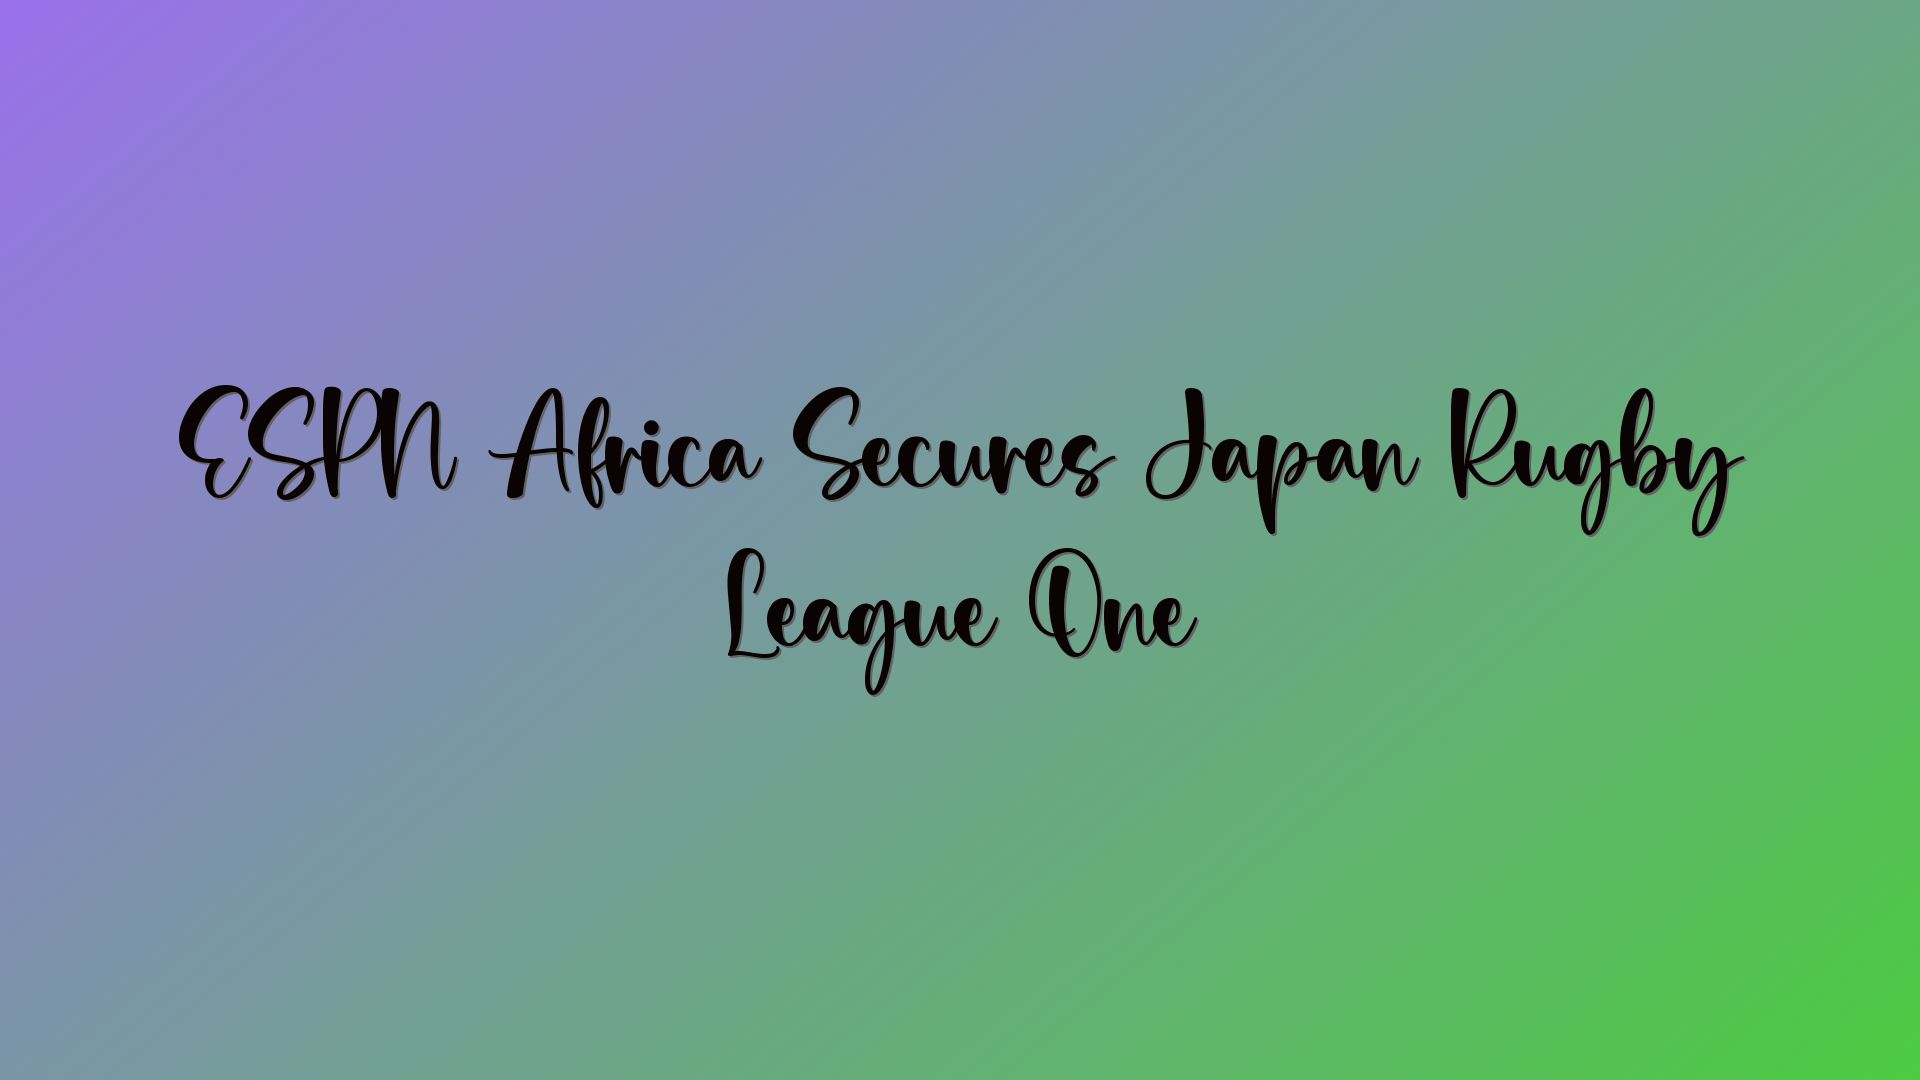 ESPN Africa Secures Japan Rugby League One